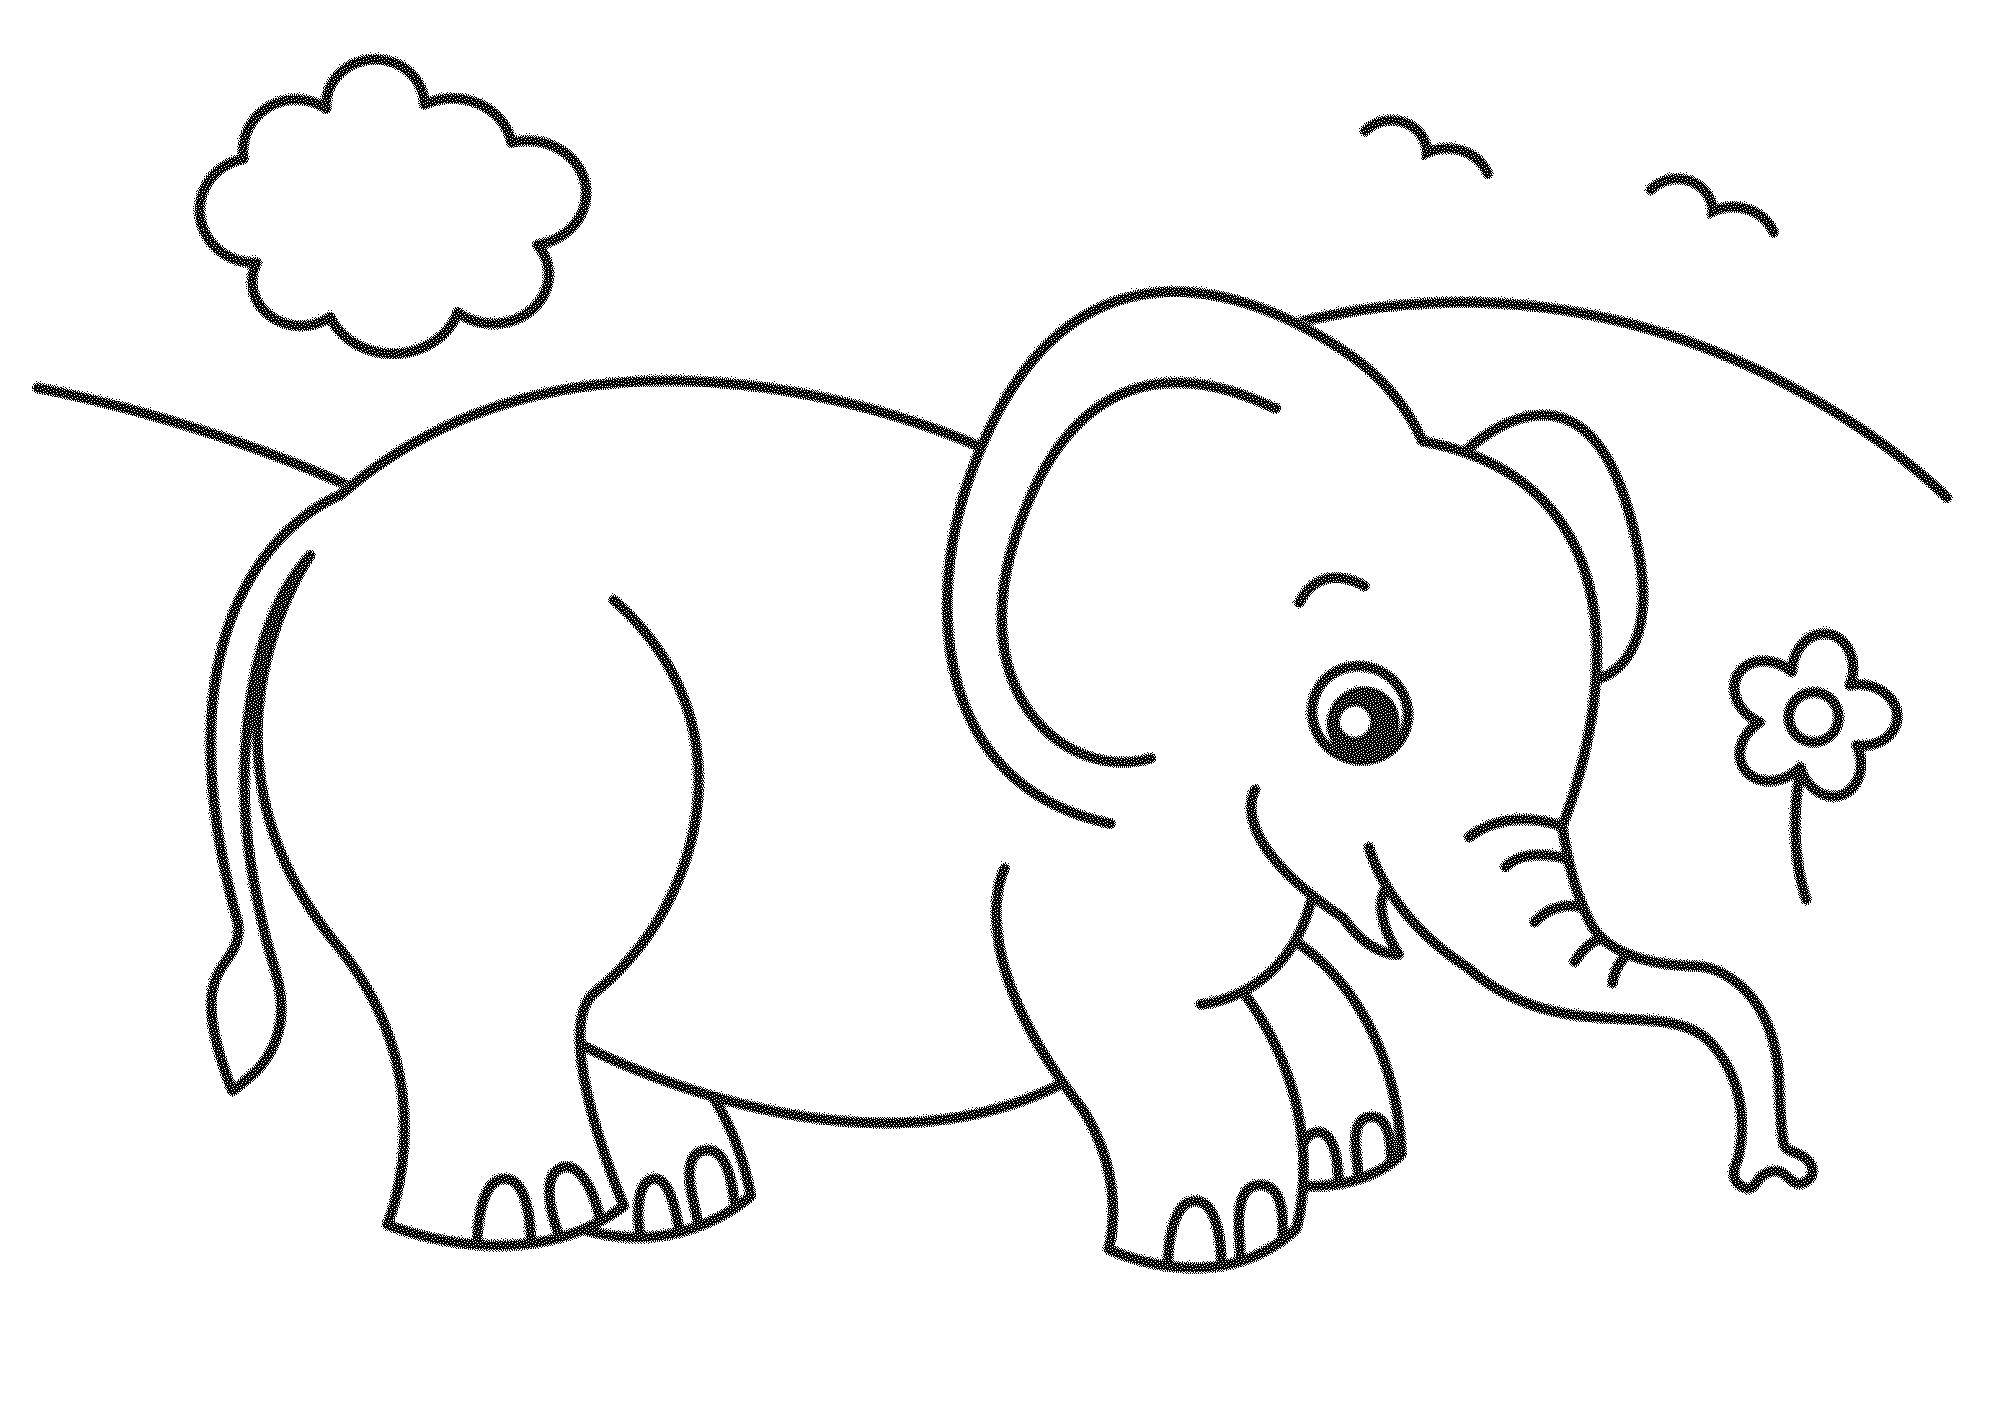 Coloring The elephant in the meadow. Category Disney coloring pages. Tags:  elephant, meadow, flower.